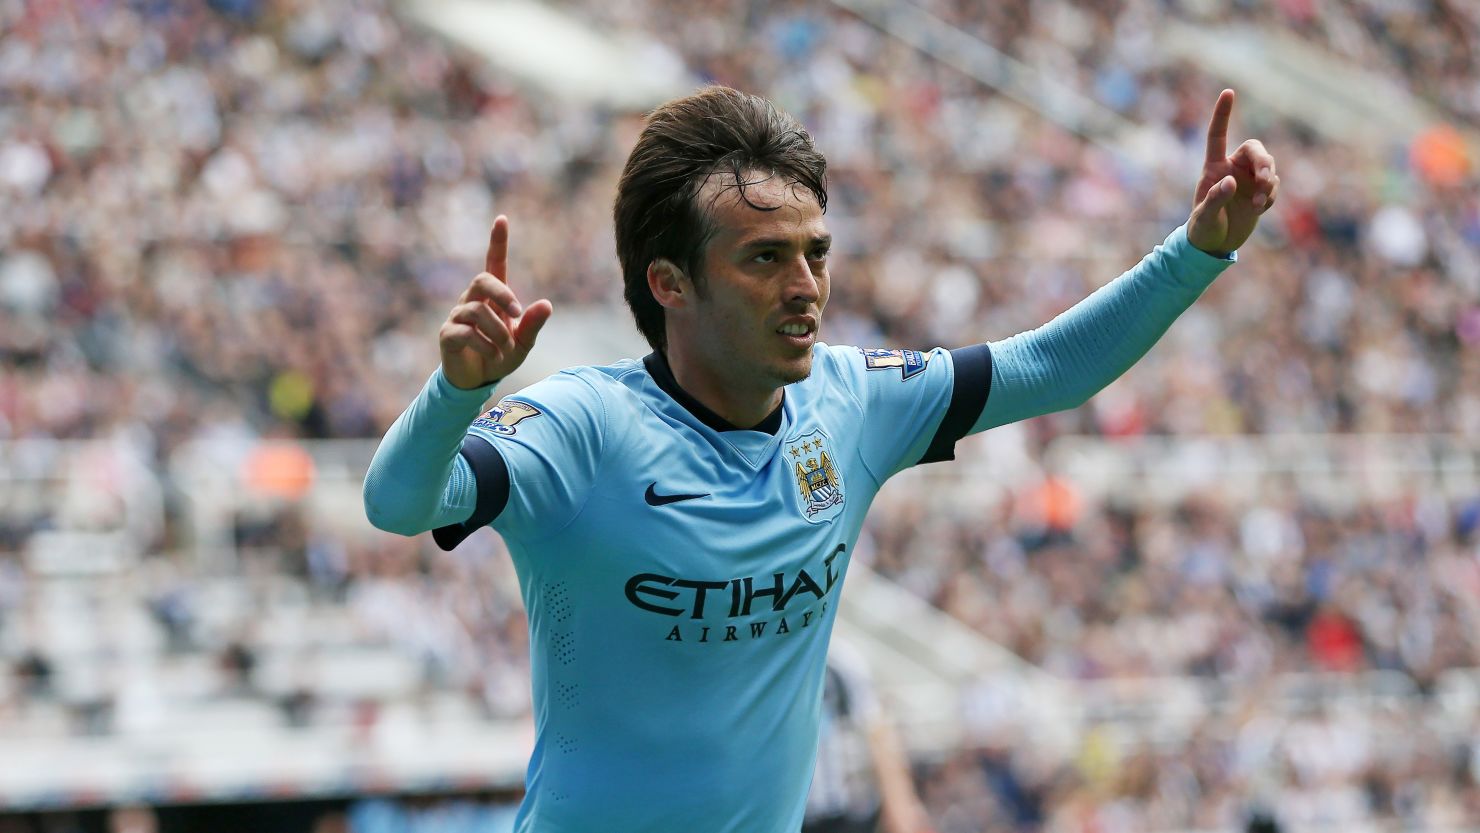 Spanish international David Silva scored the opening goal in a 2-0 victory.